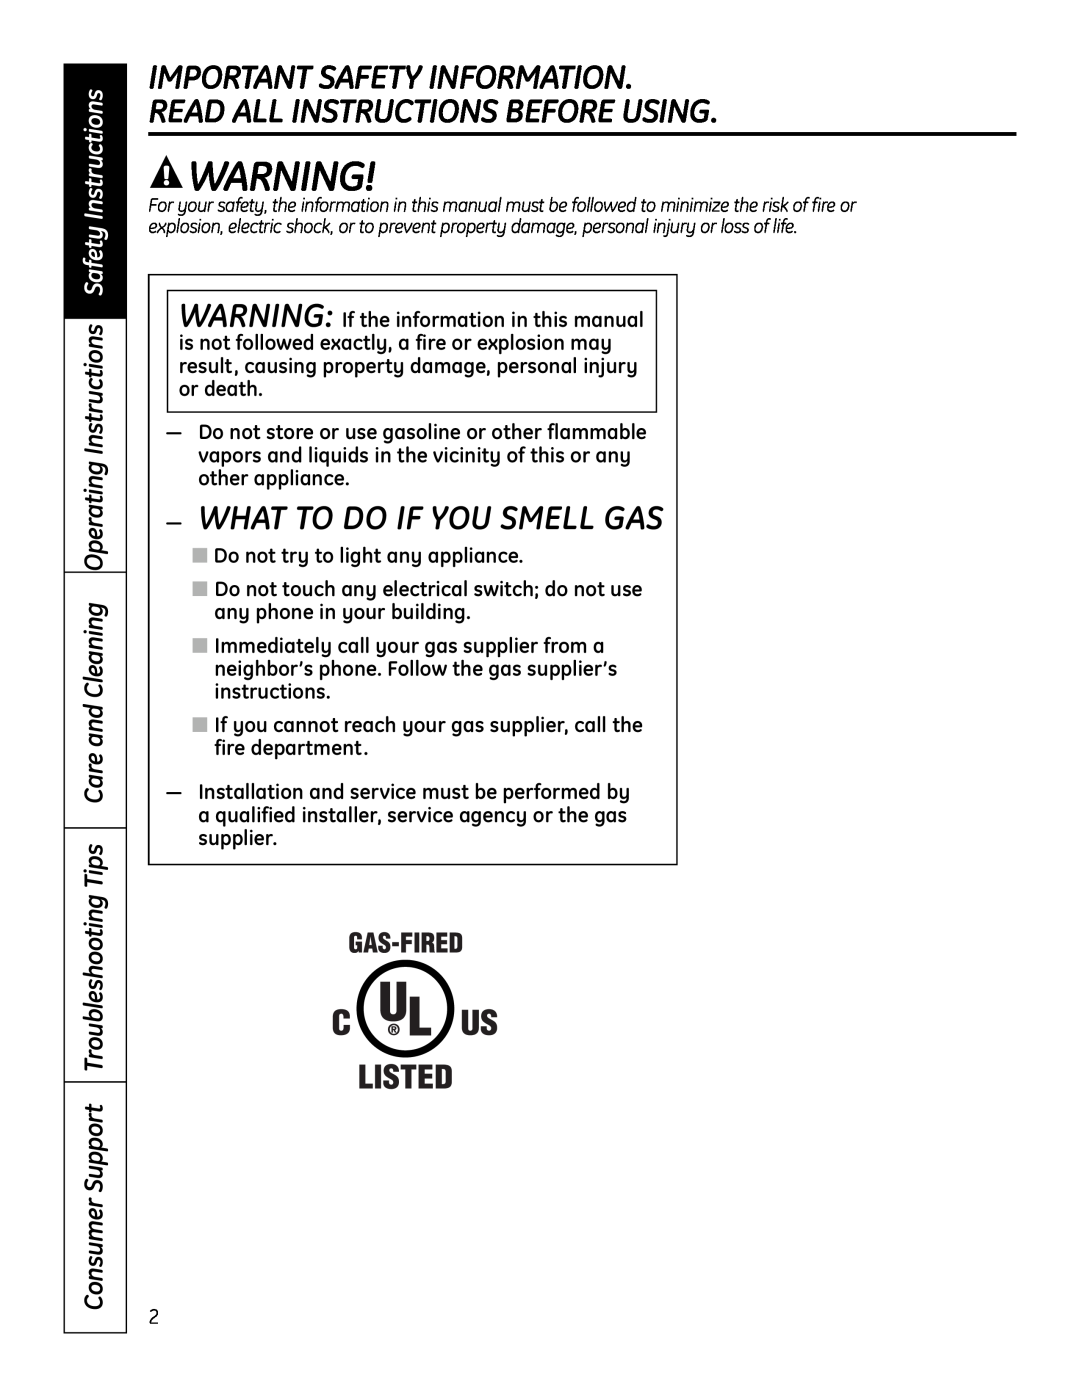 GE PGP989 manual What To Do If You Smell Gas 